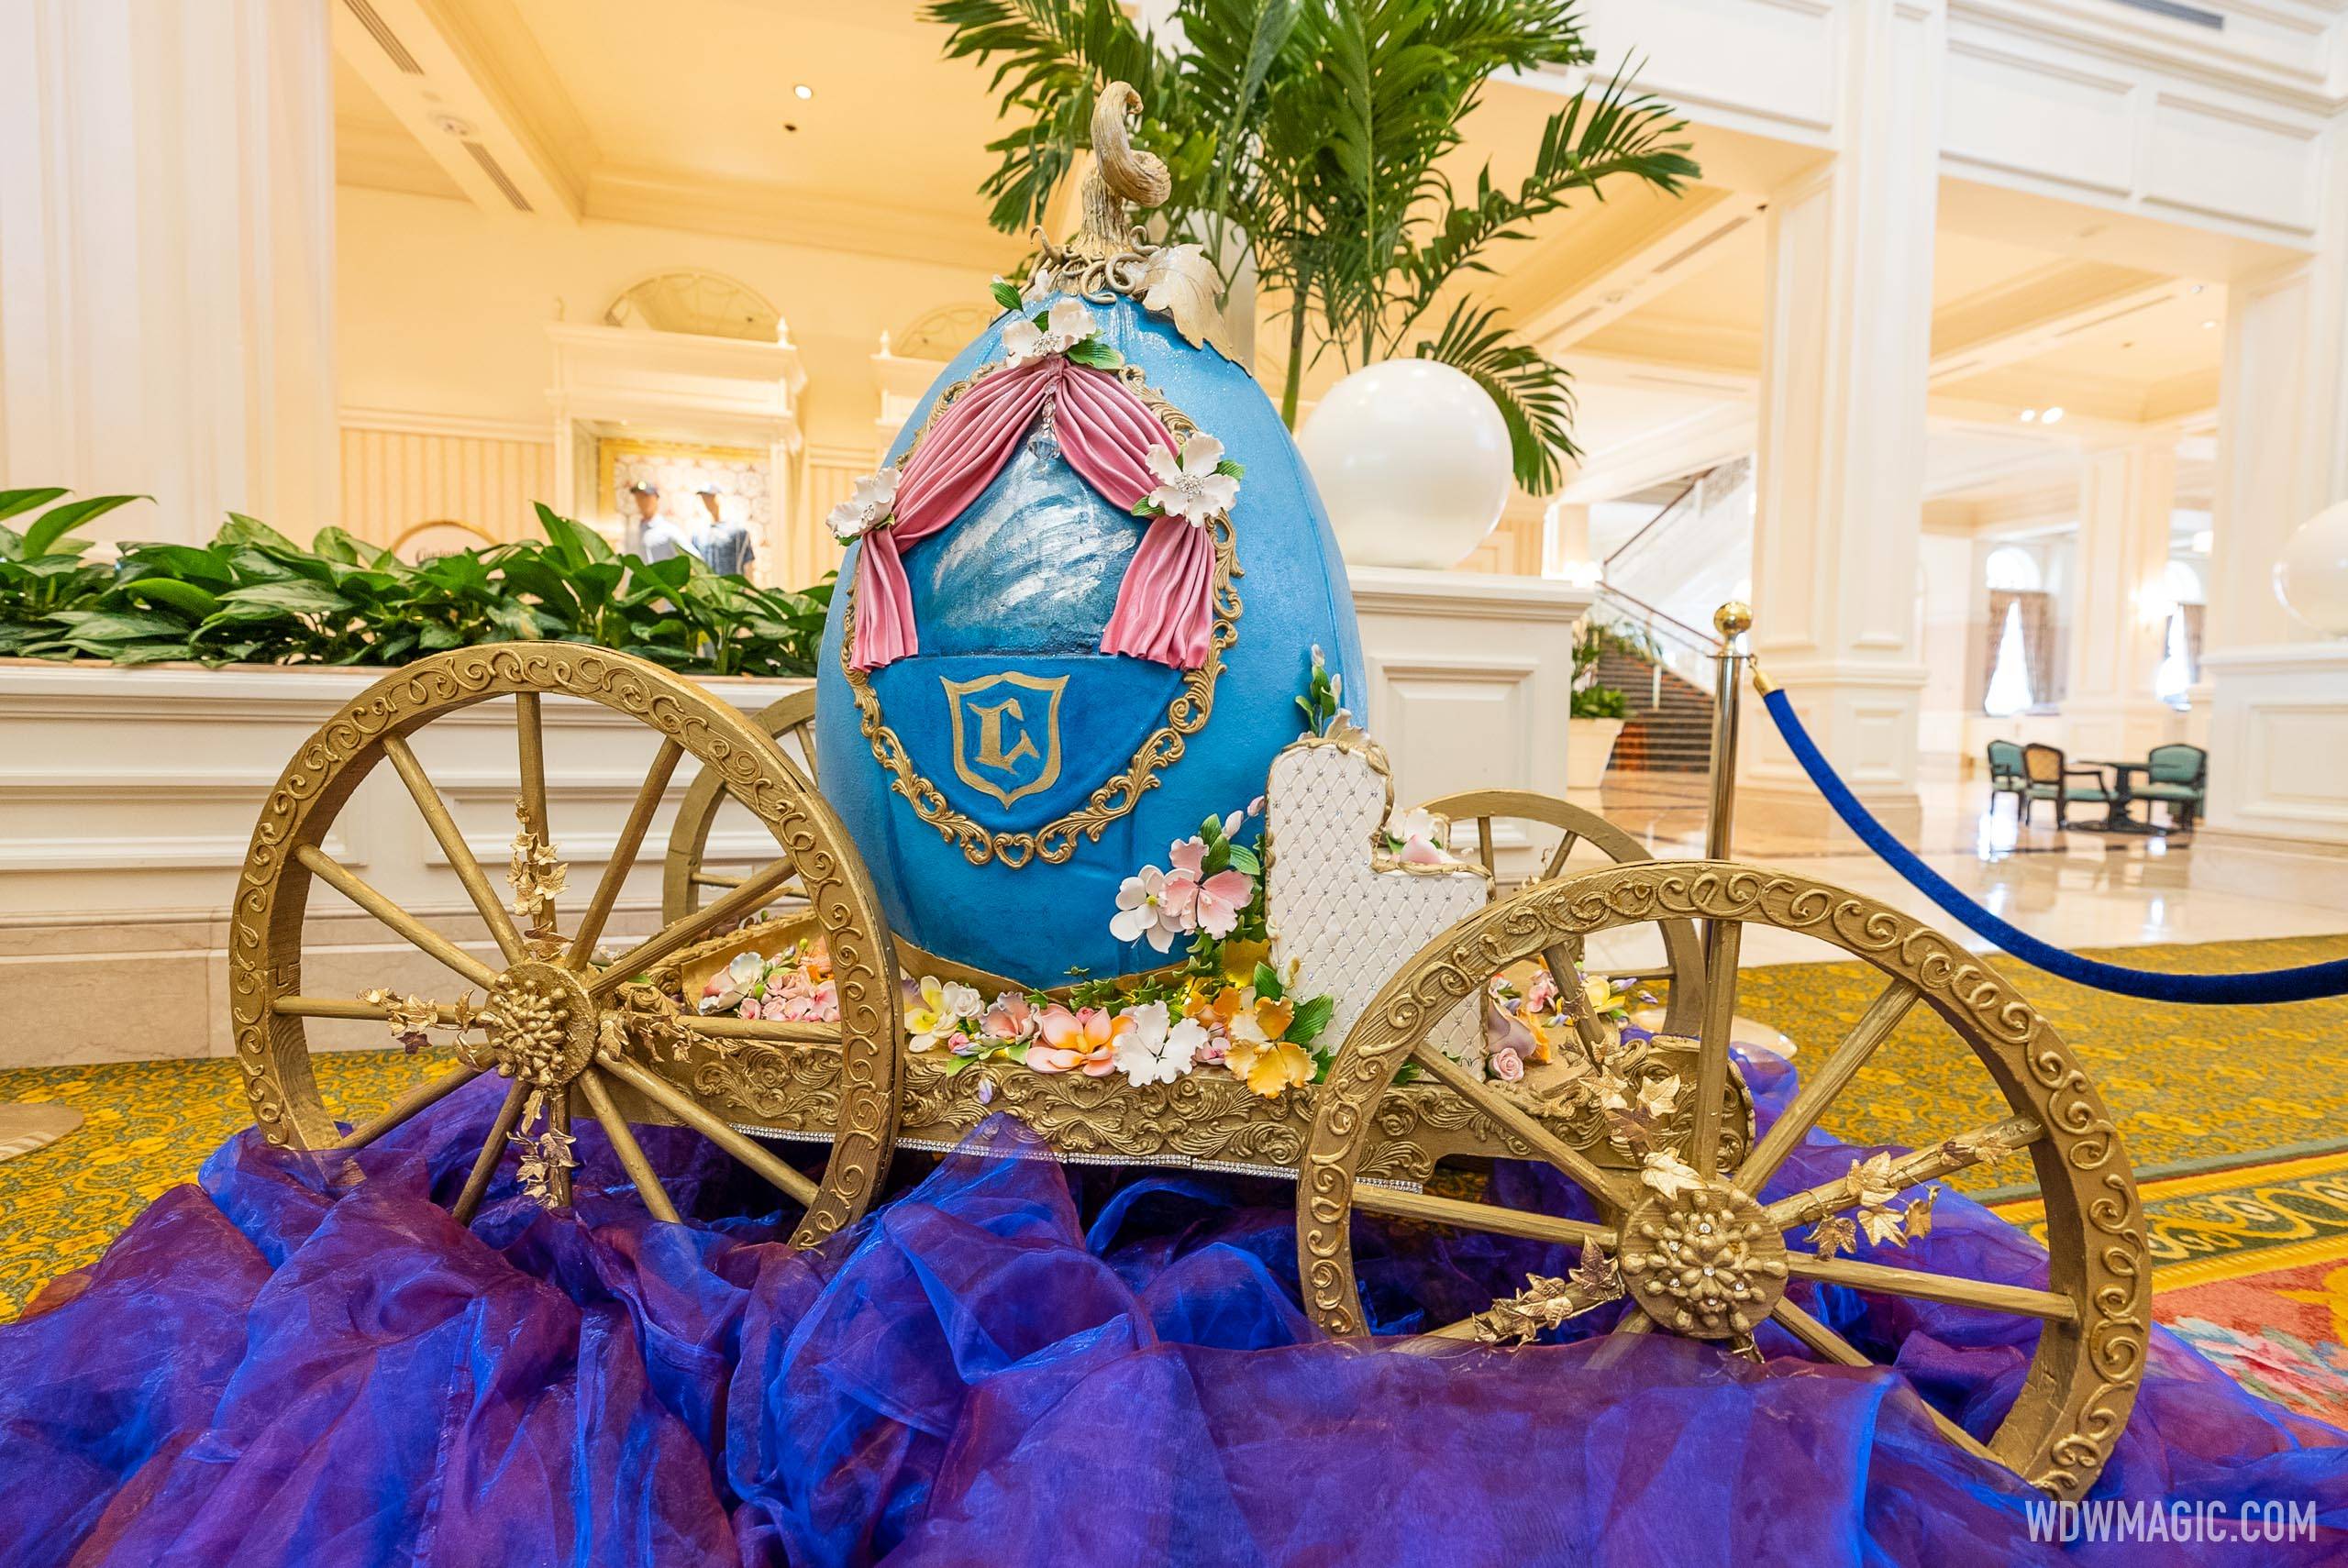 The Grand Cottage and Easter Egg display at Disney's Grand Floridian Resort